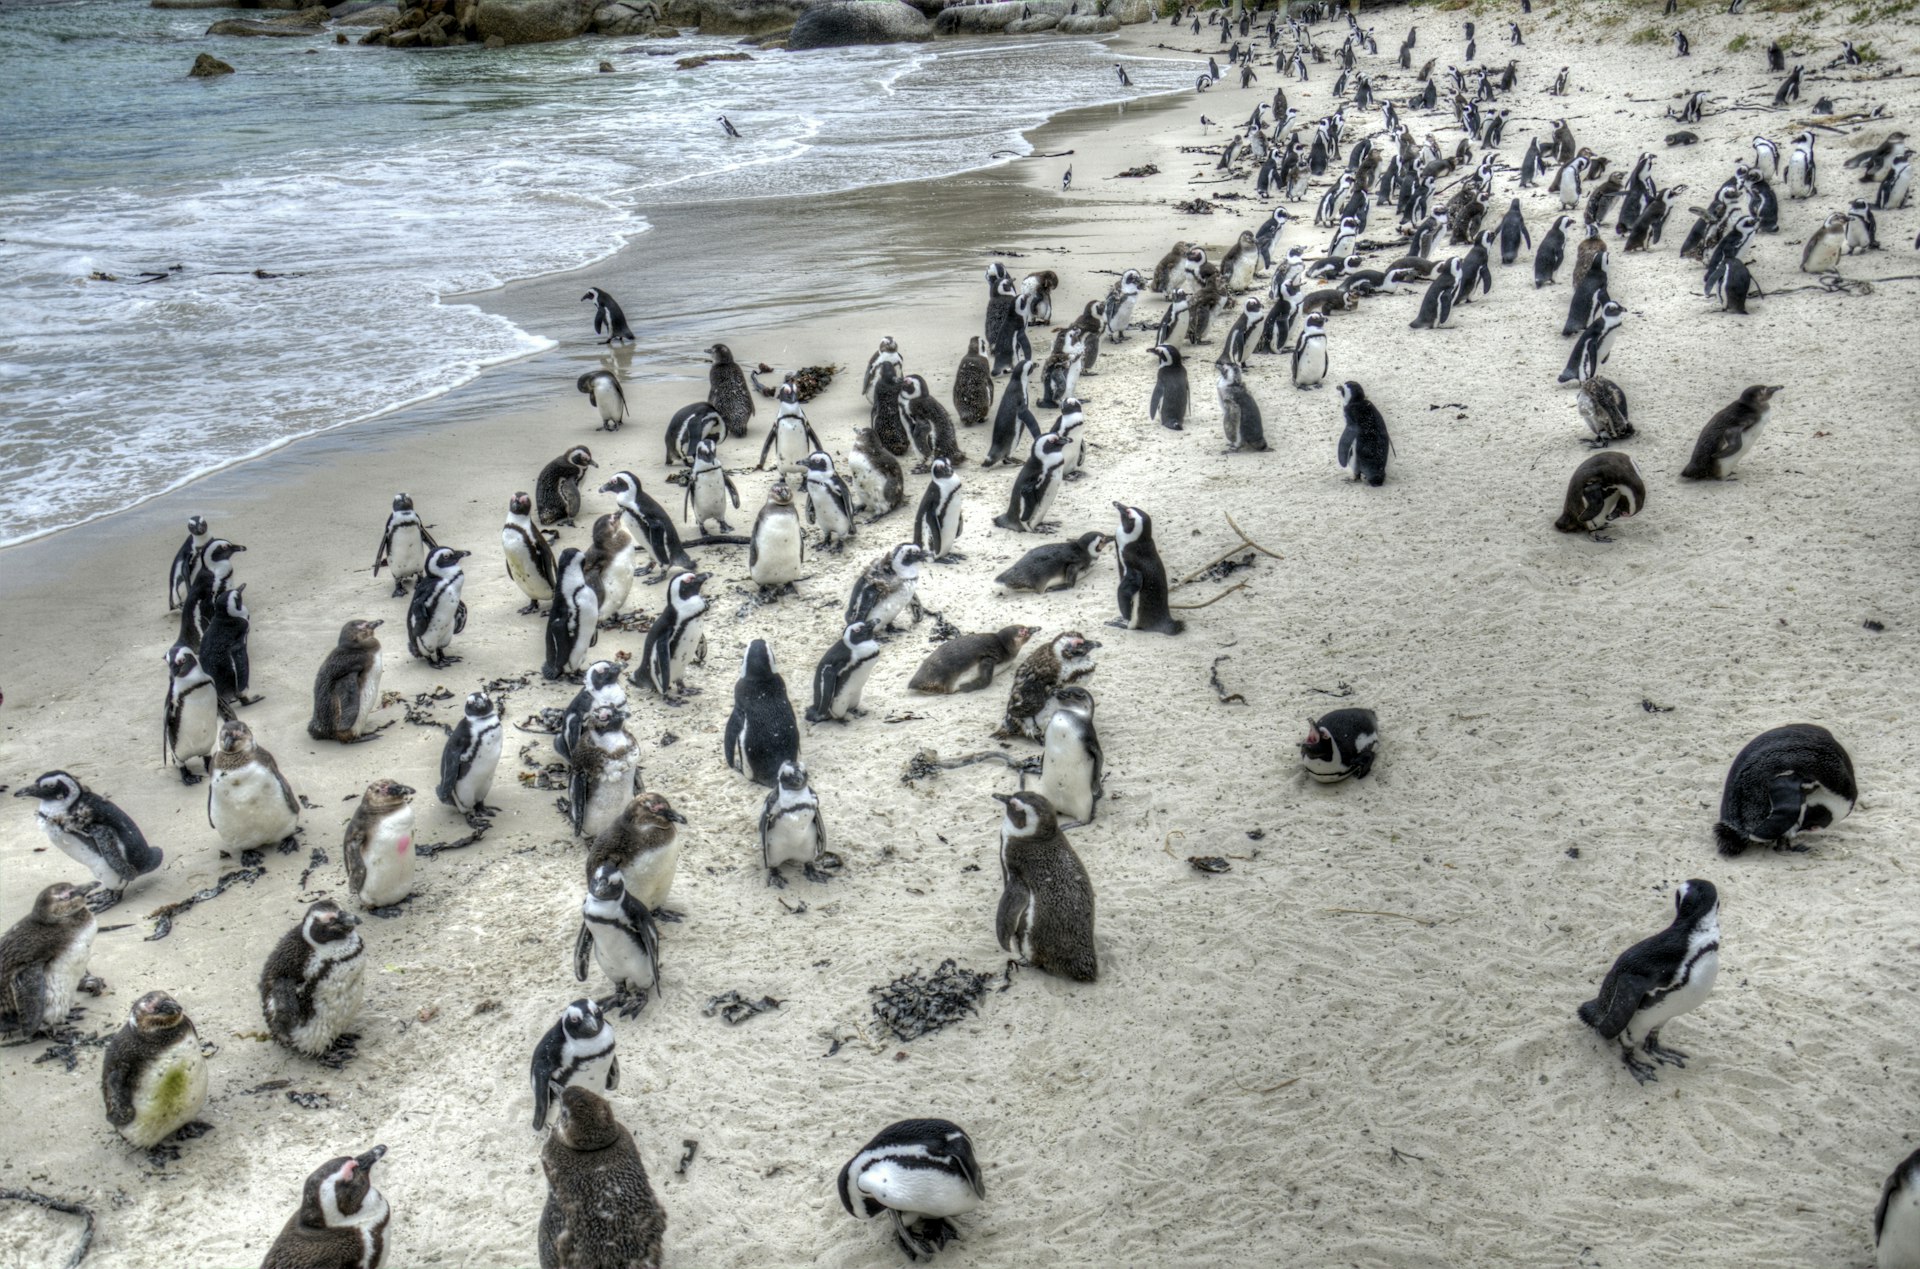 Penguin colony on Boulders Beach, South Africa